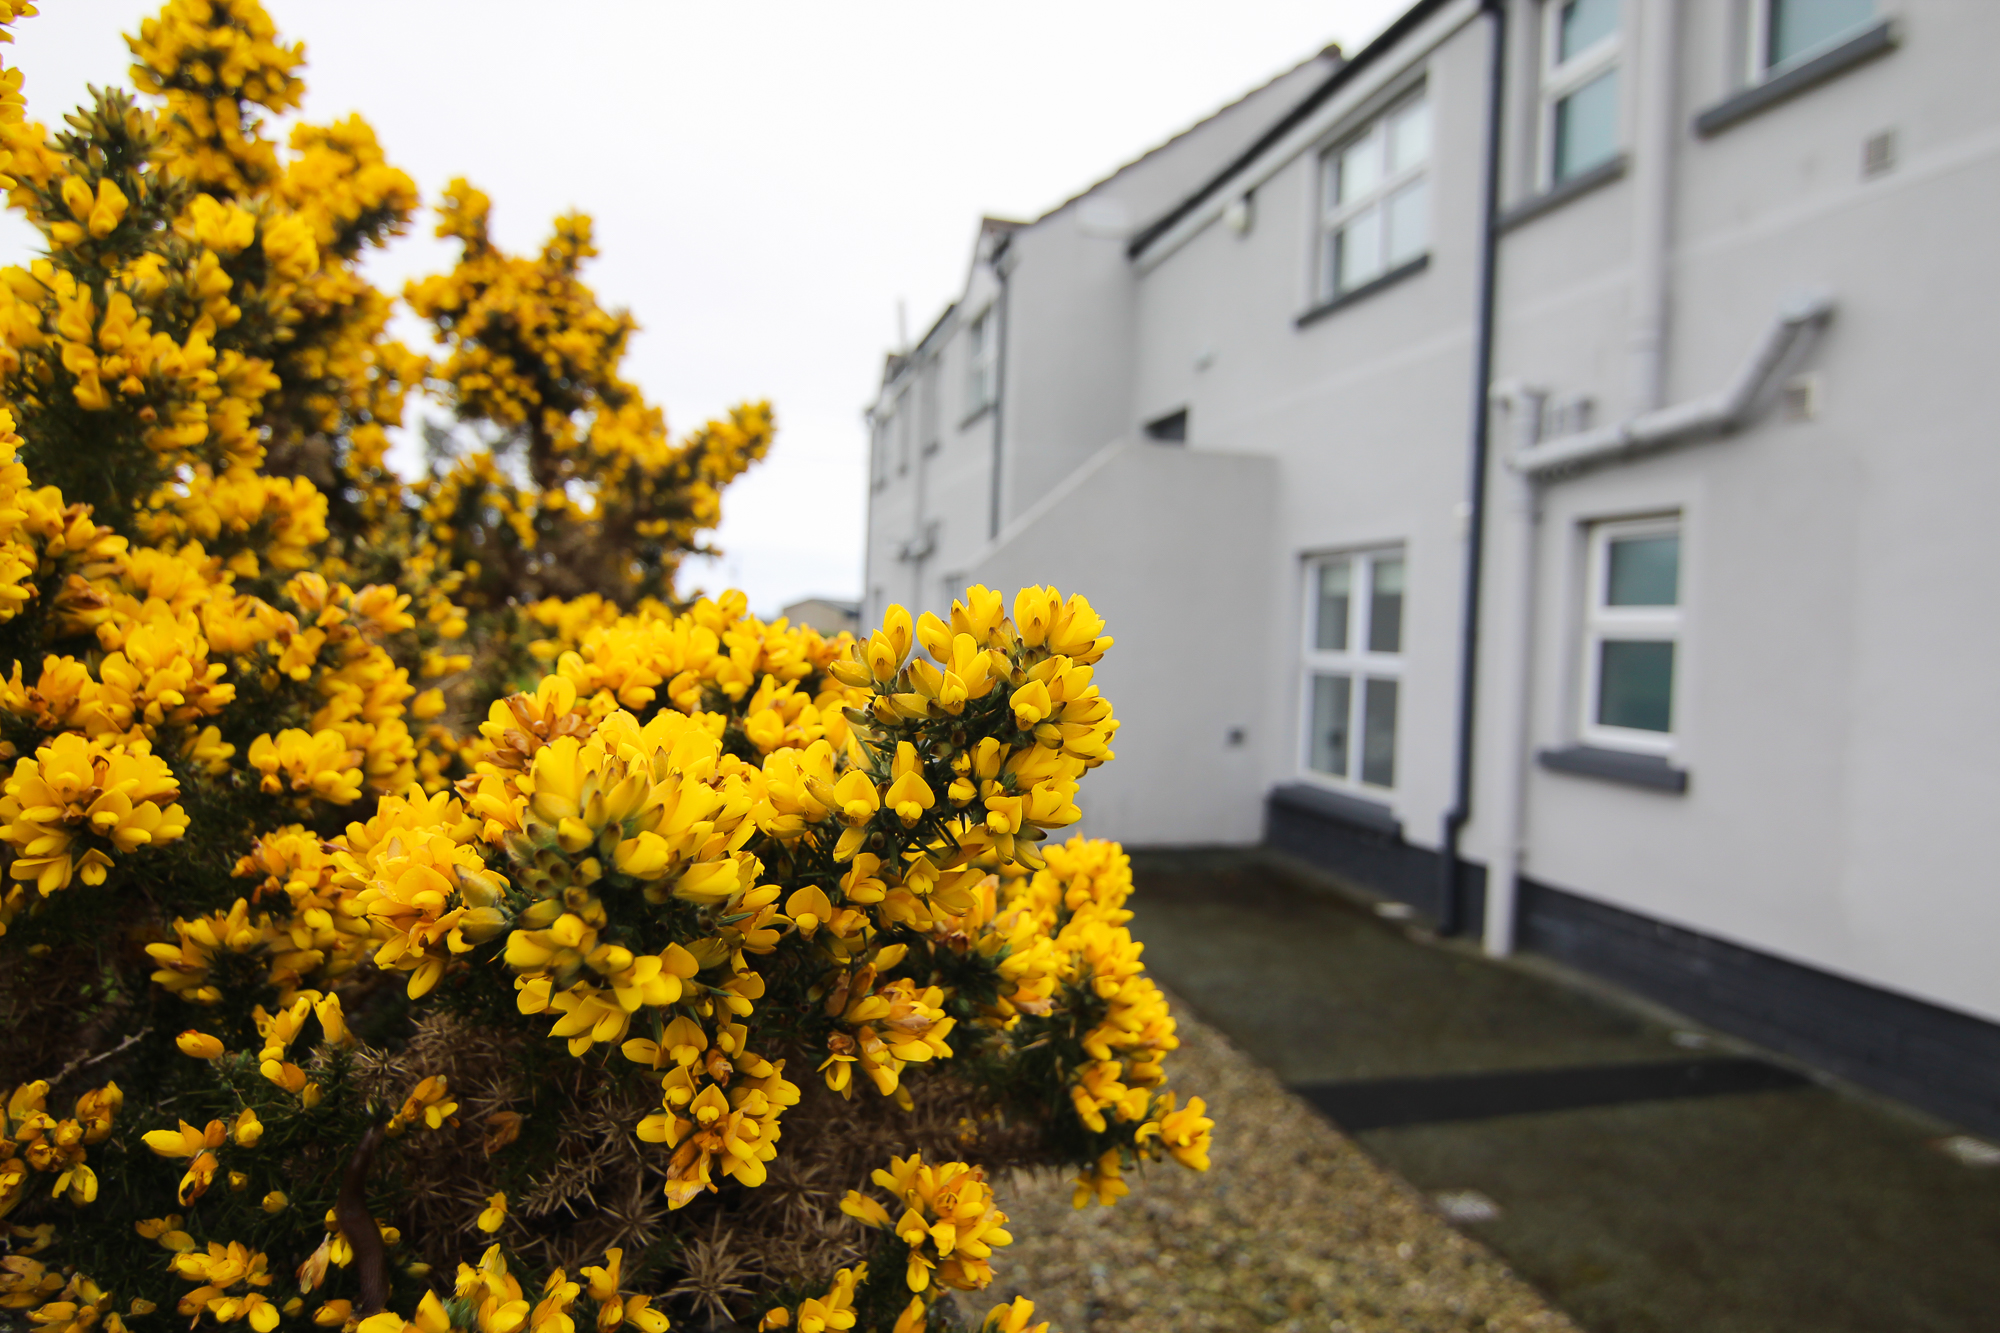 IncredABLE – bright yellow gorse in the gardens